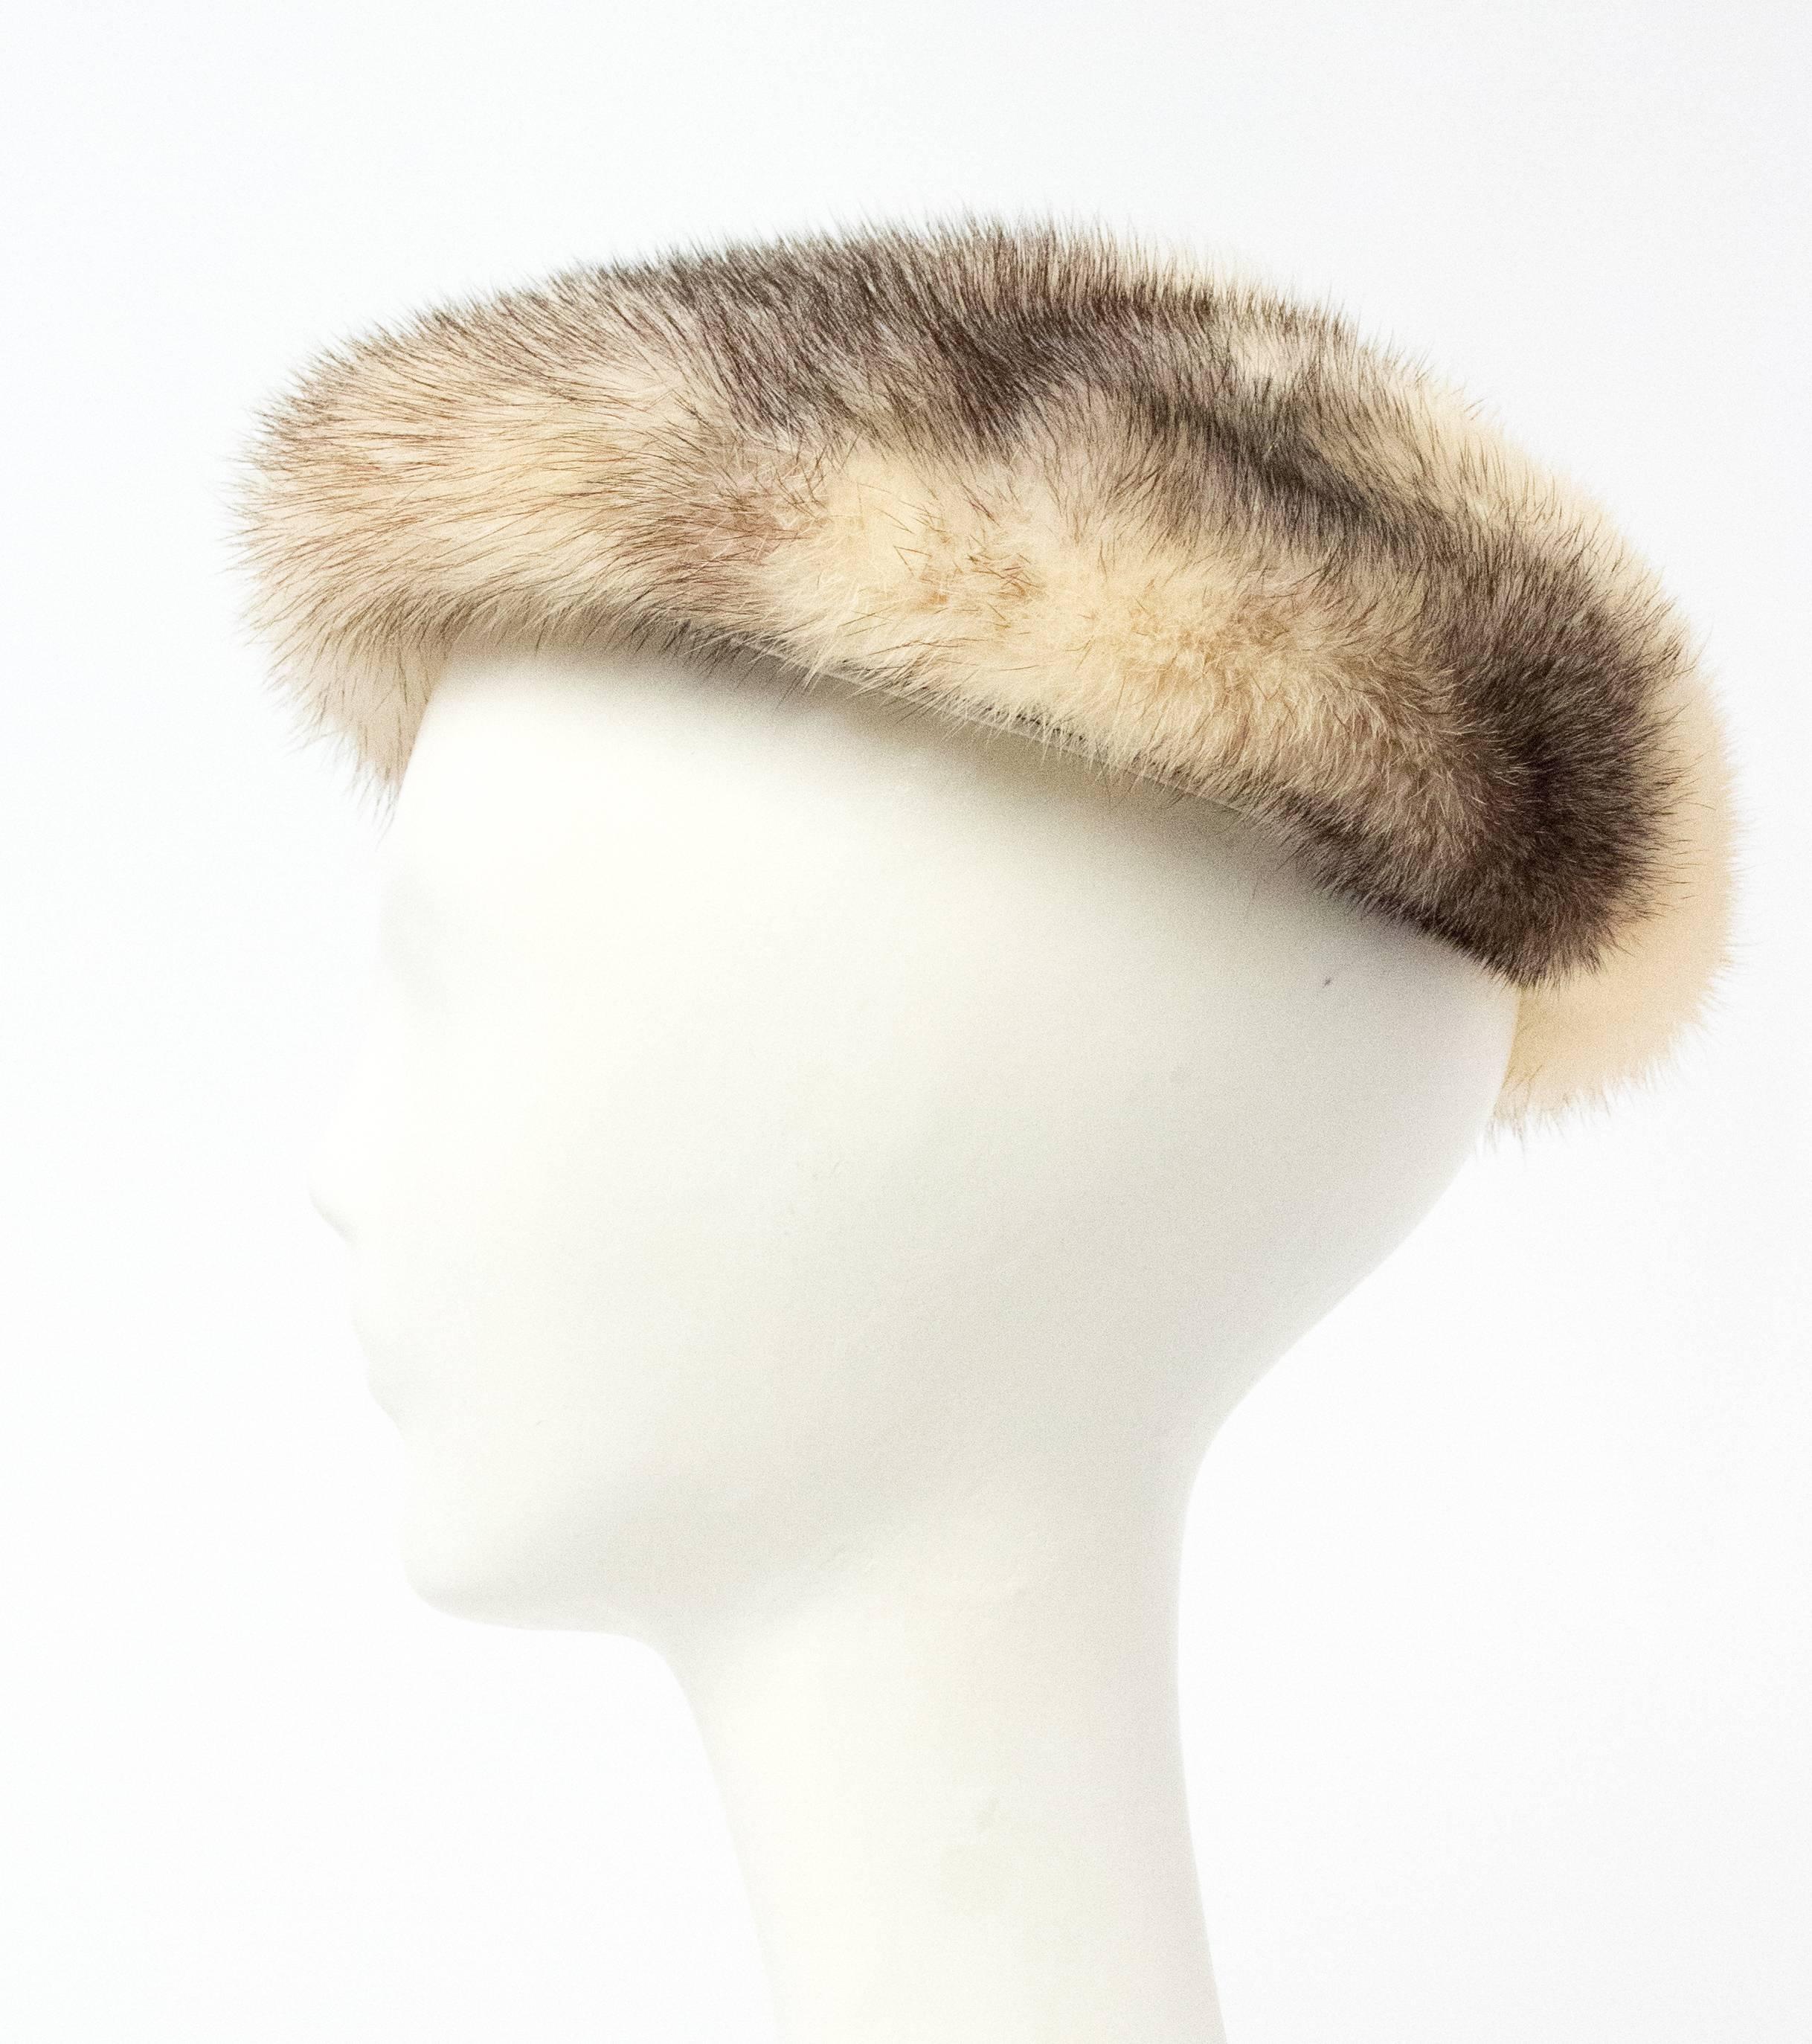 60s natural cream & black hat with satin trim. Lined in a cotton blend knit. Grosgrain and velvet interior band. 

Measurements:
Interior circumference: 21 1/2